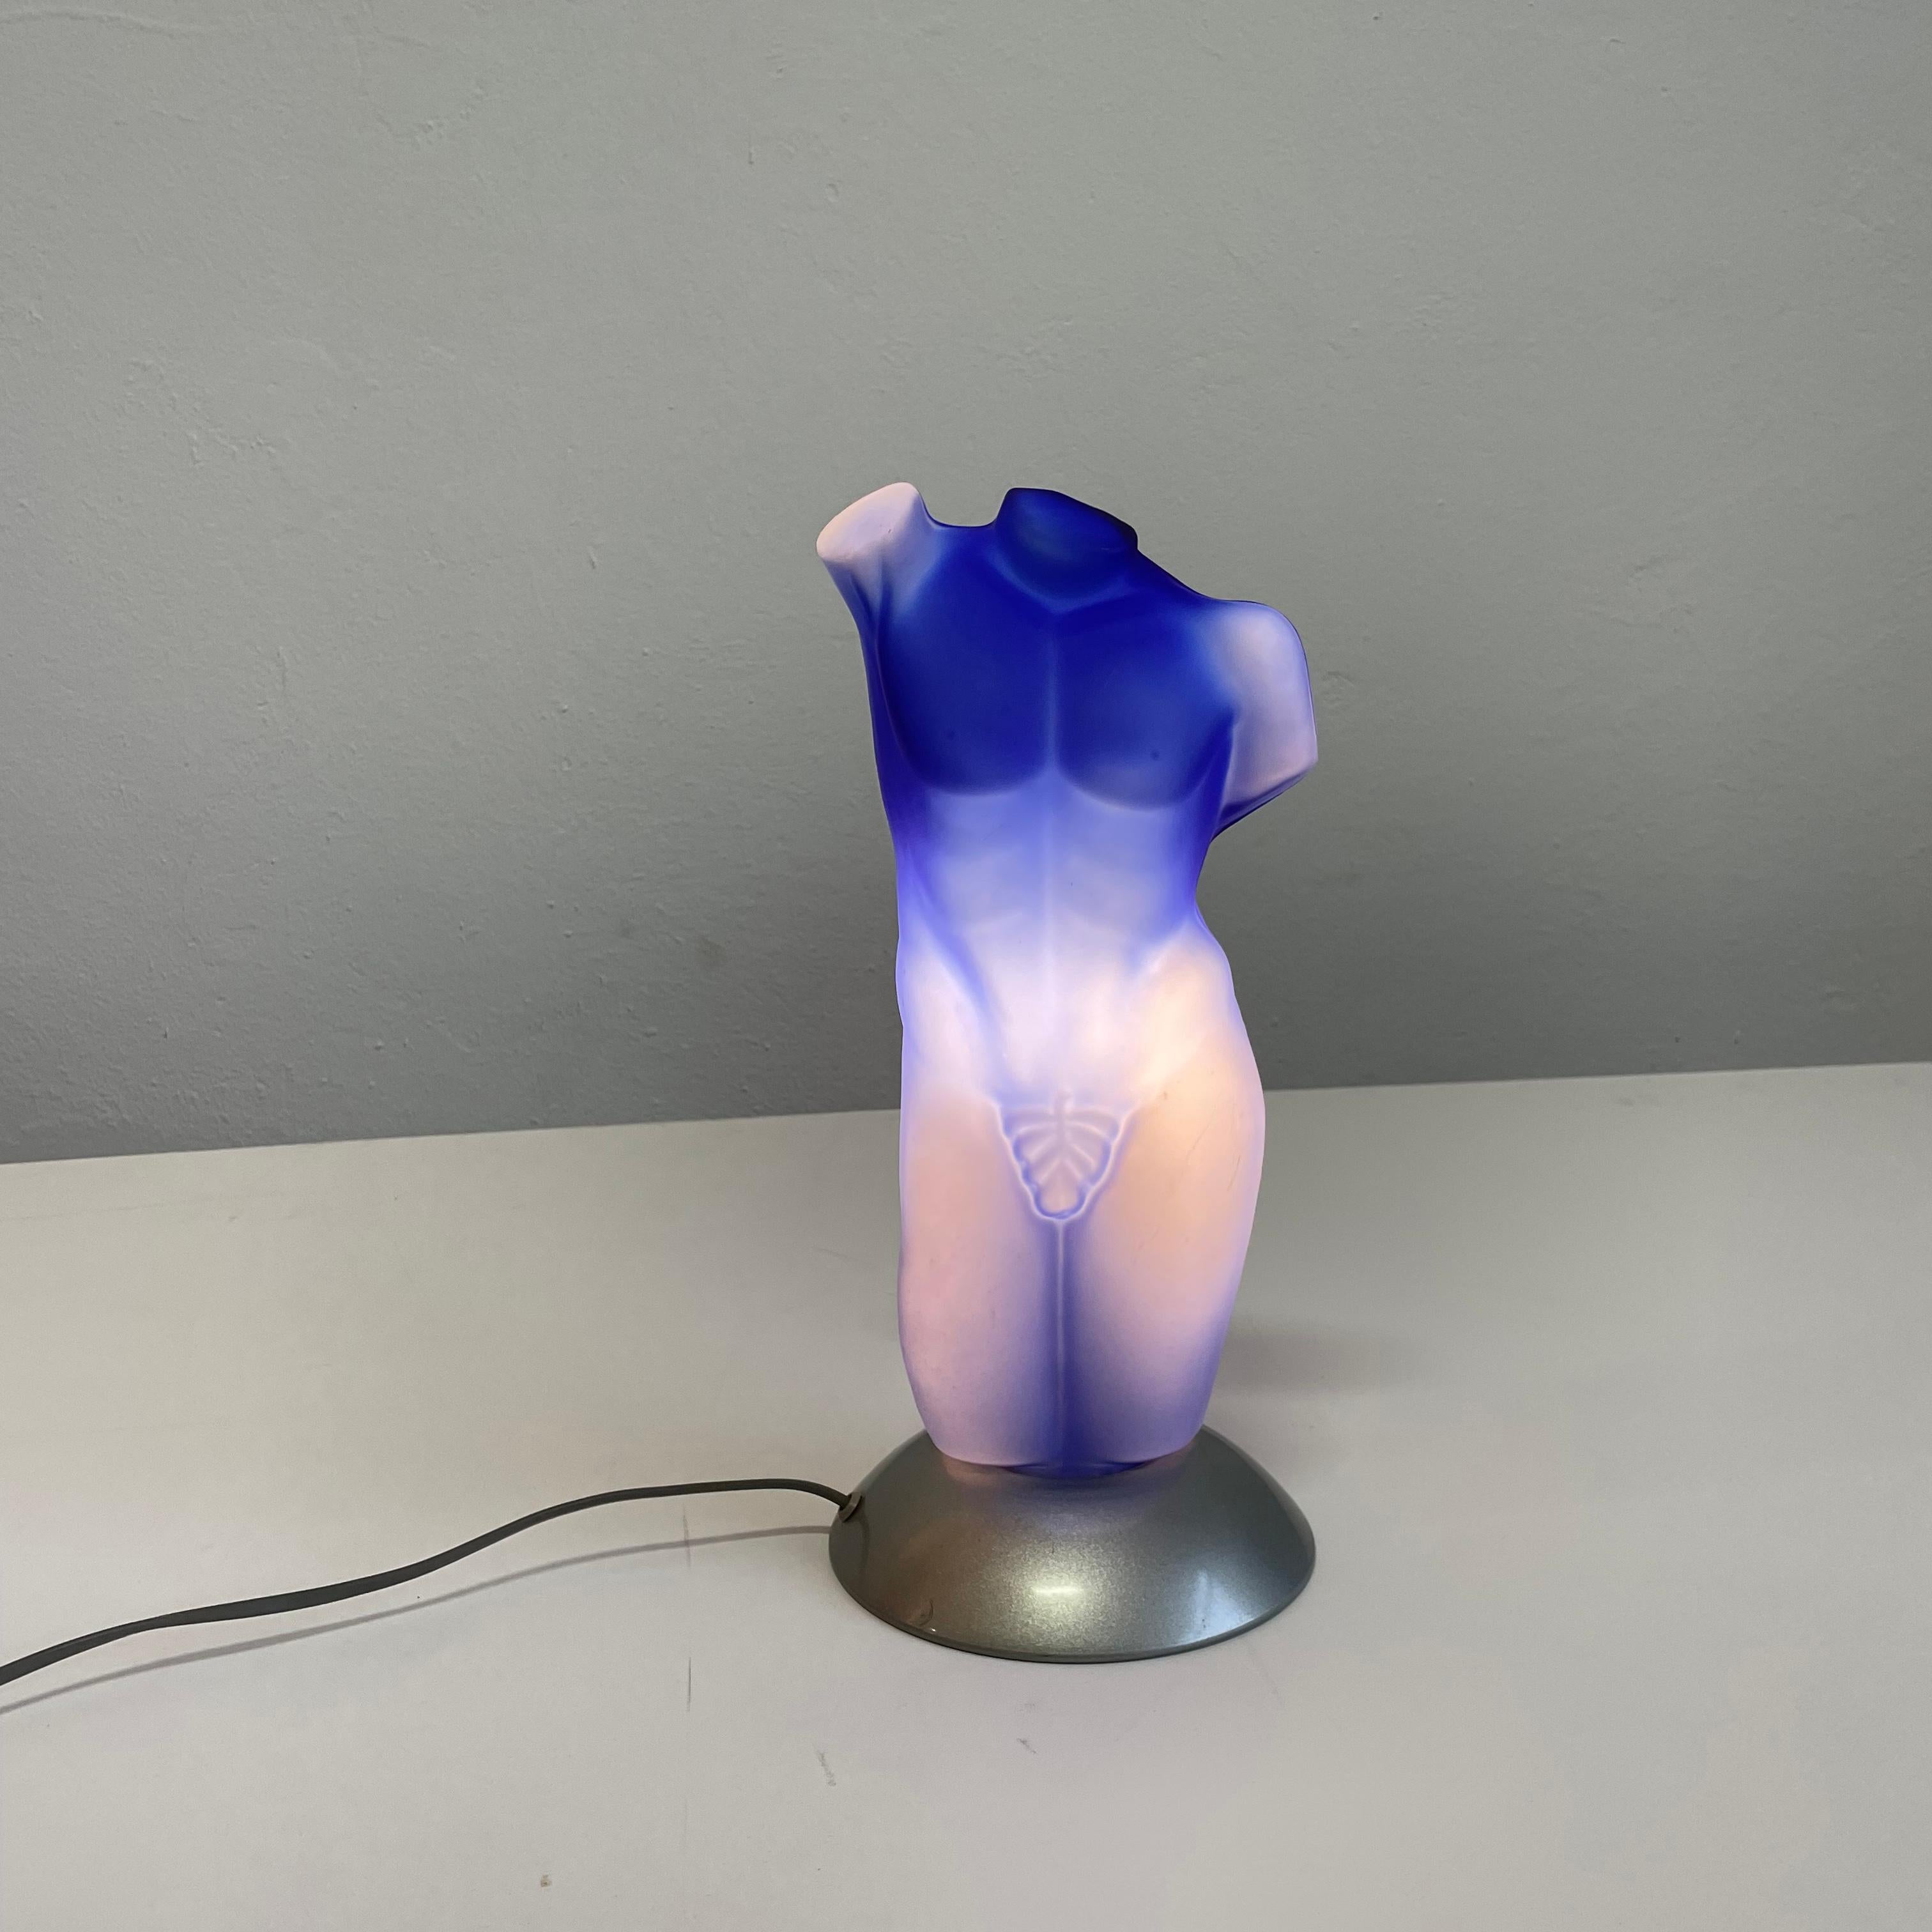 Metal Post Modern Italian Male Torso Table Lamp in Frosted Blue Glass, Sculptural Lamp